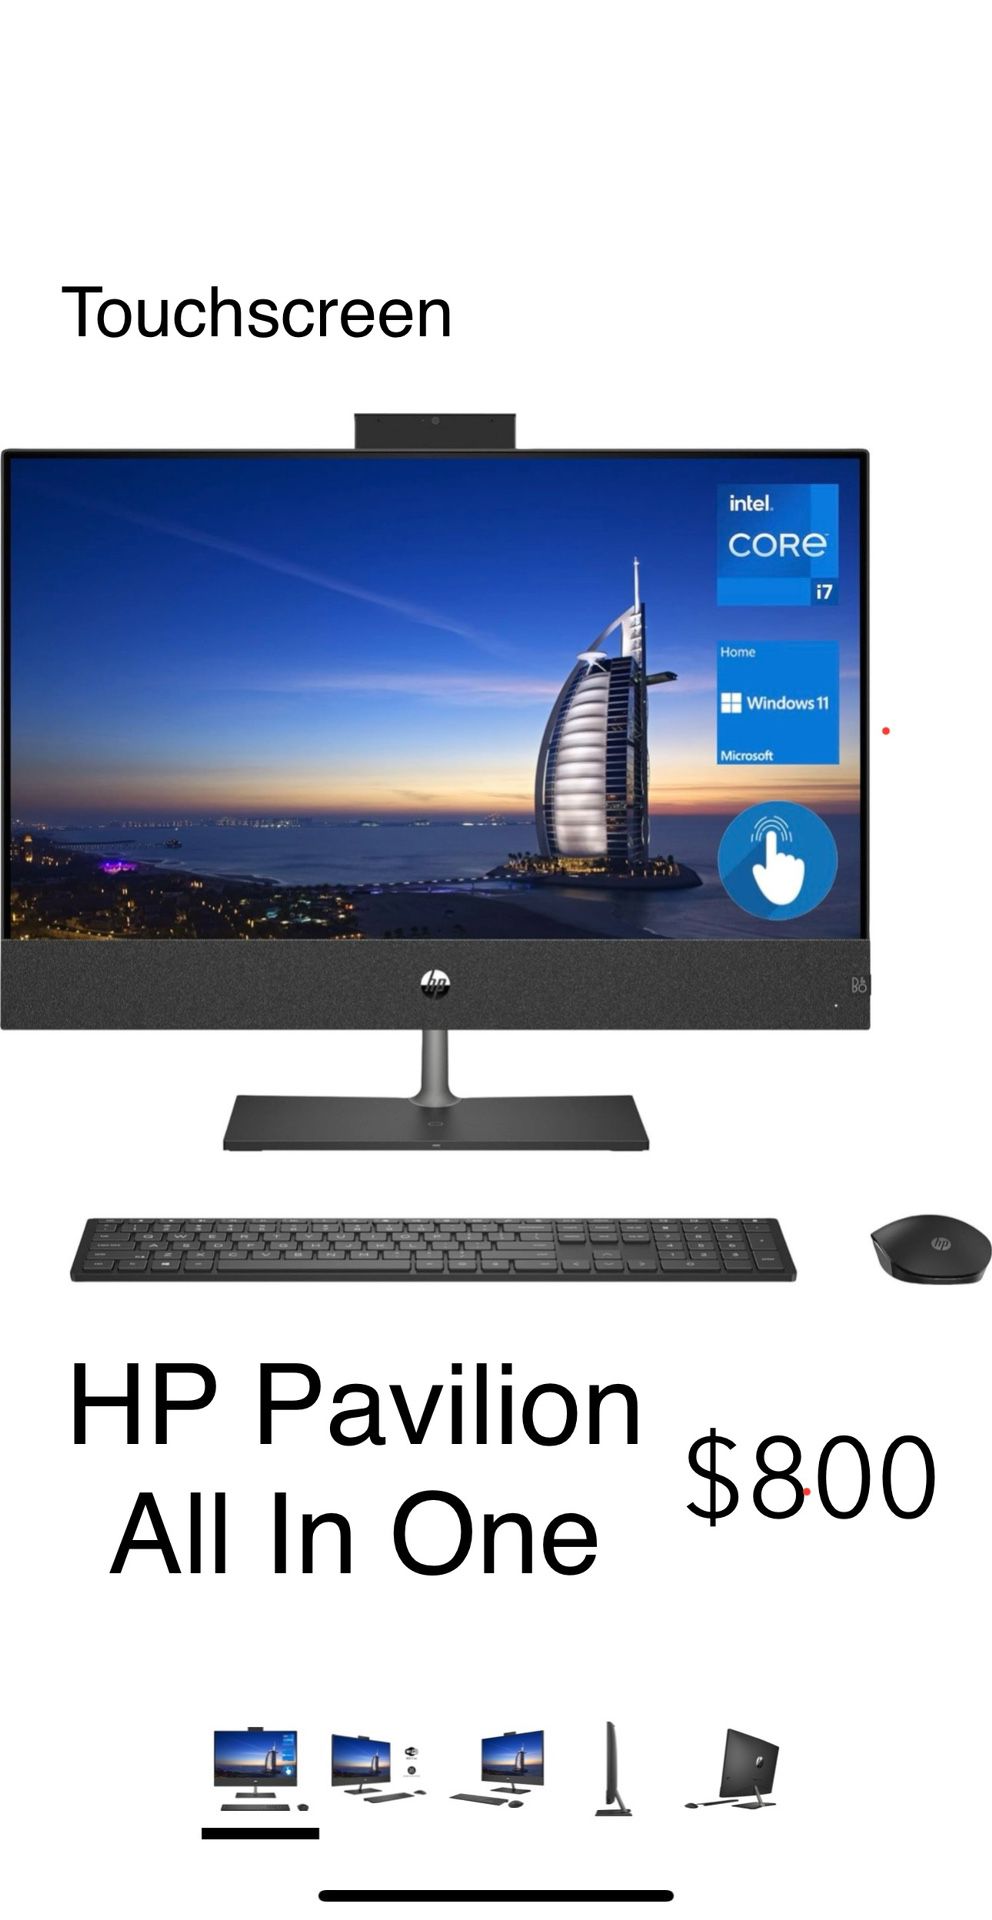 HP Pavilion All In One